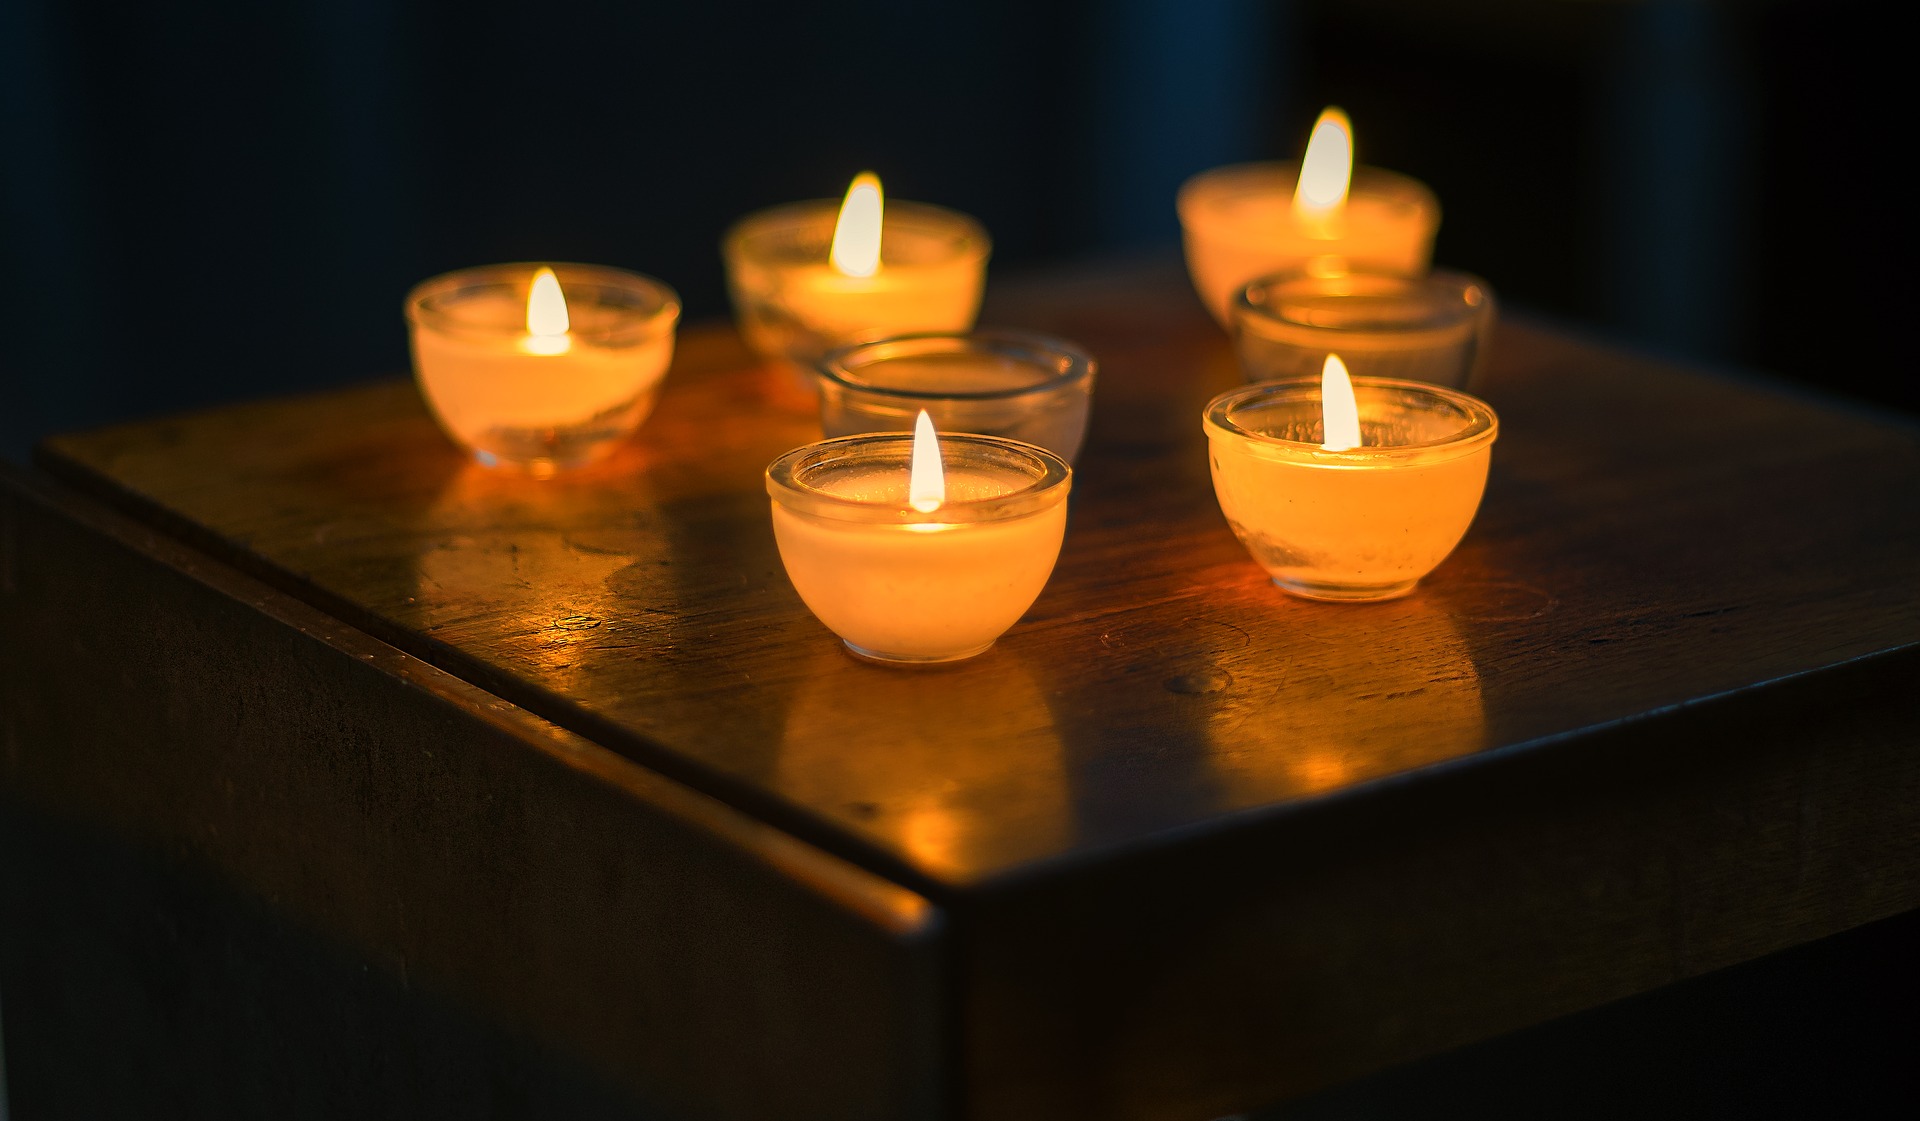 A group of candles lit on top of a wooden table.